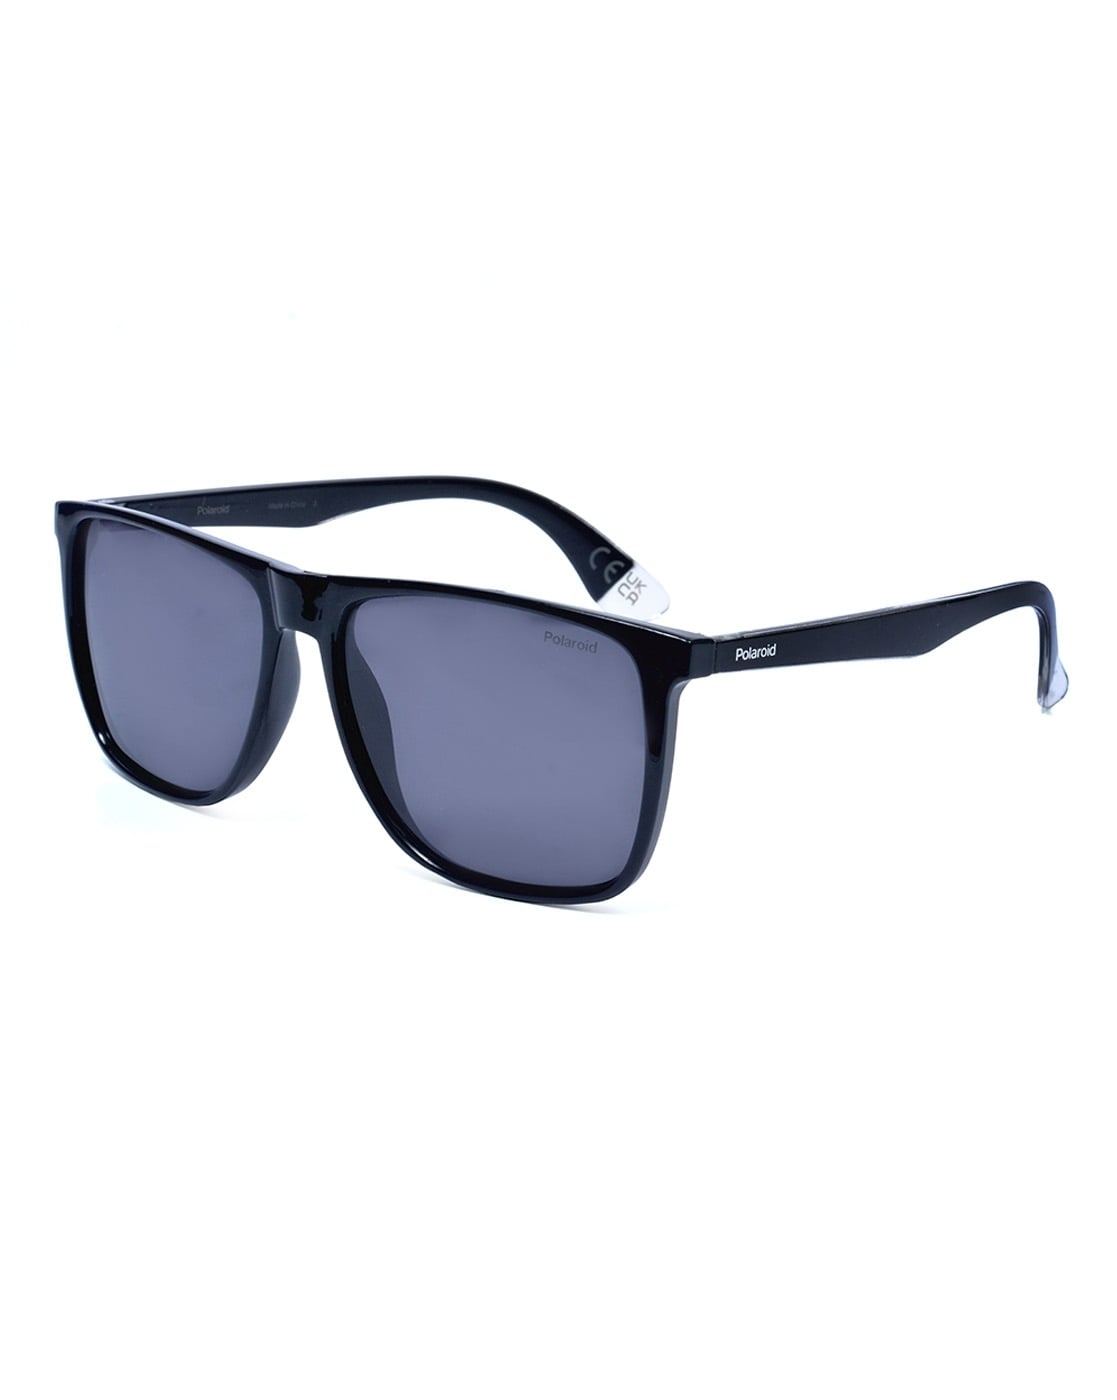 Buy 100% UV Protection Sunglasses Online at Best Price